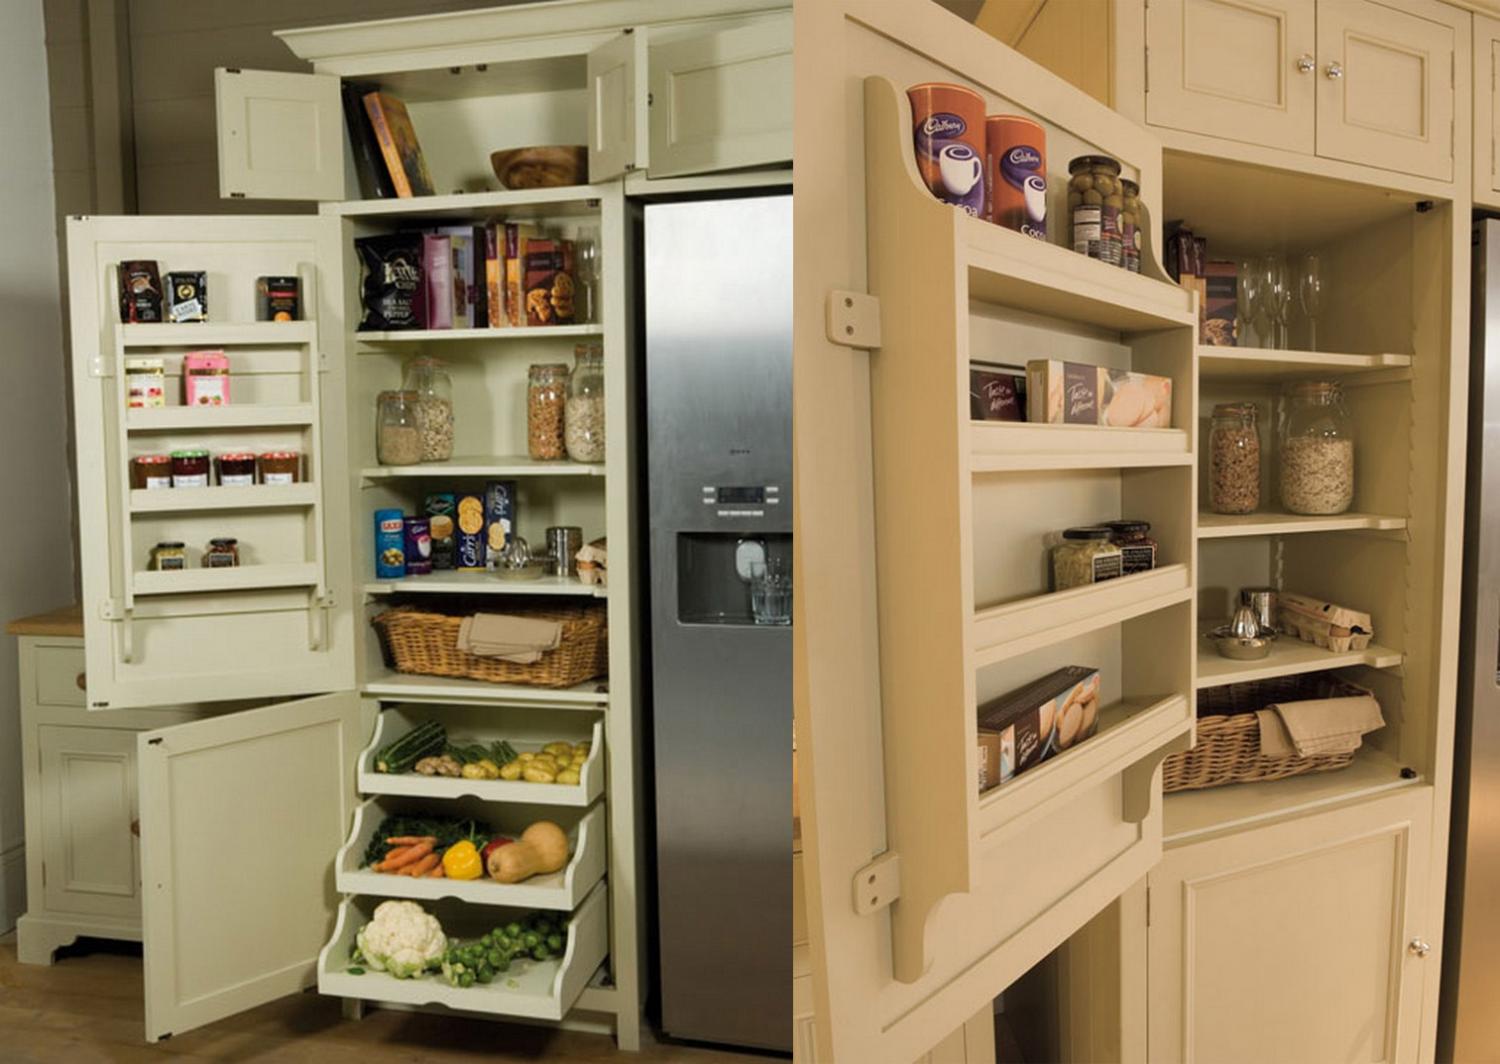 This Neptune Wrap Around Refrigerator Pantry Is The Ultimate Kitchen Storage Solution